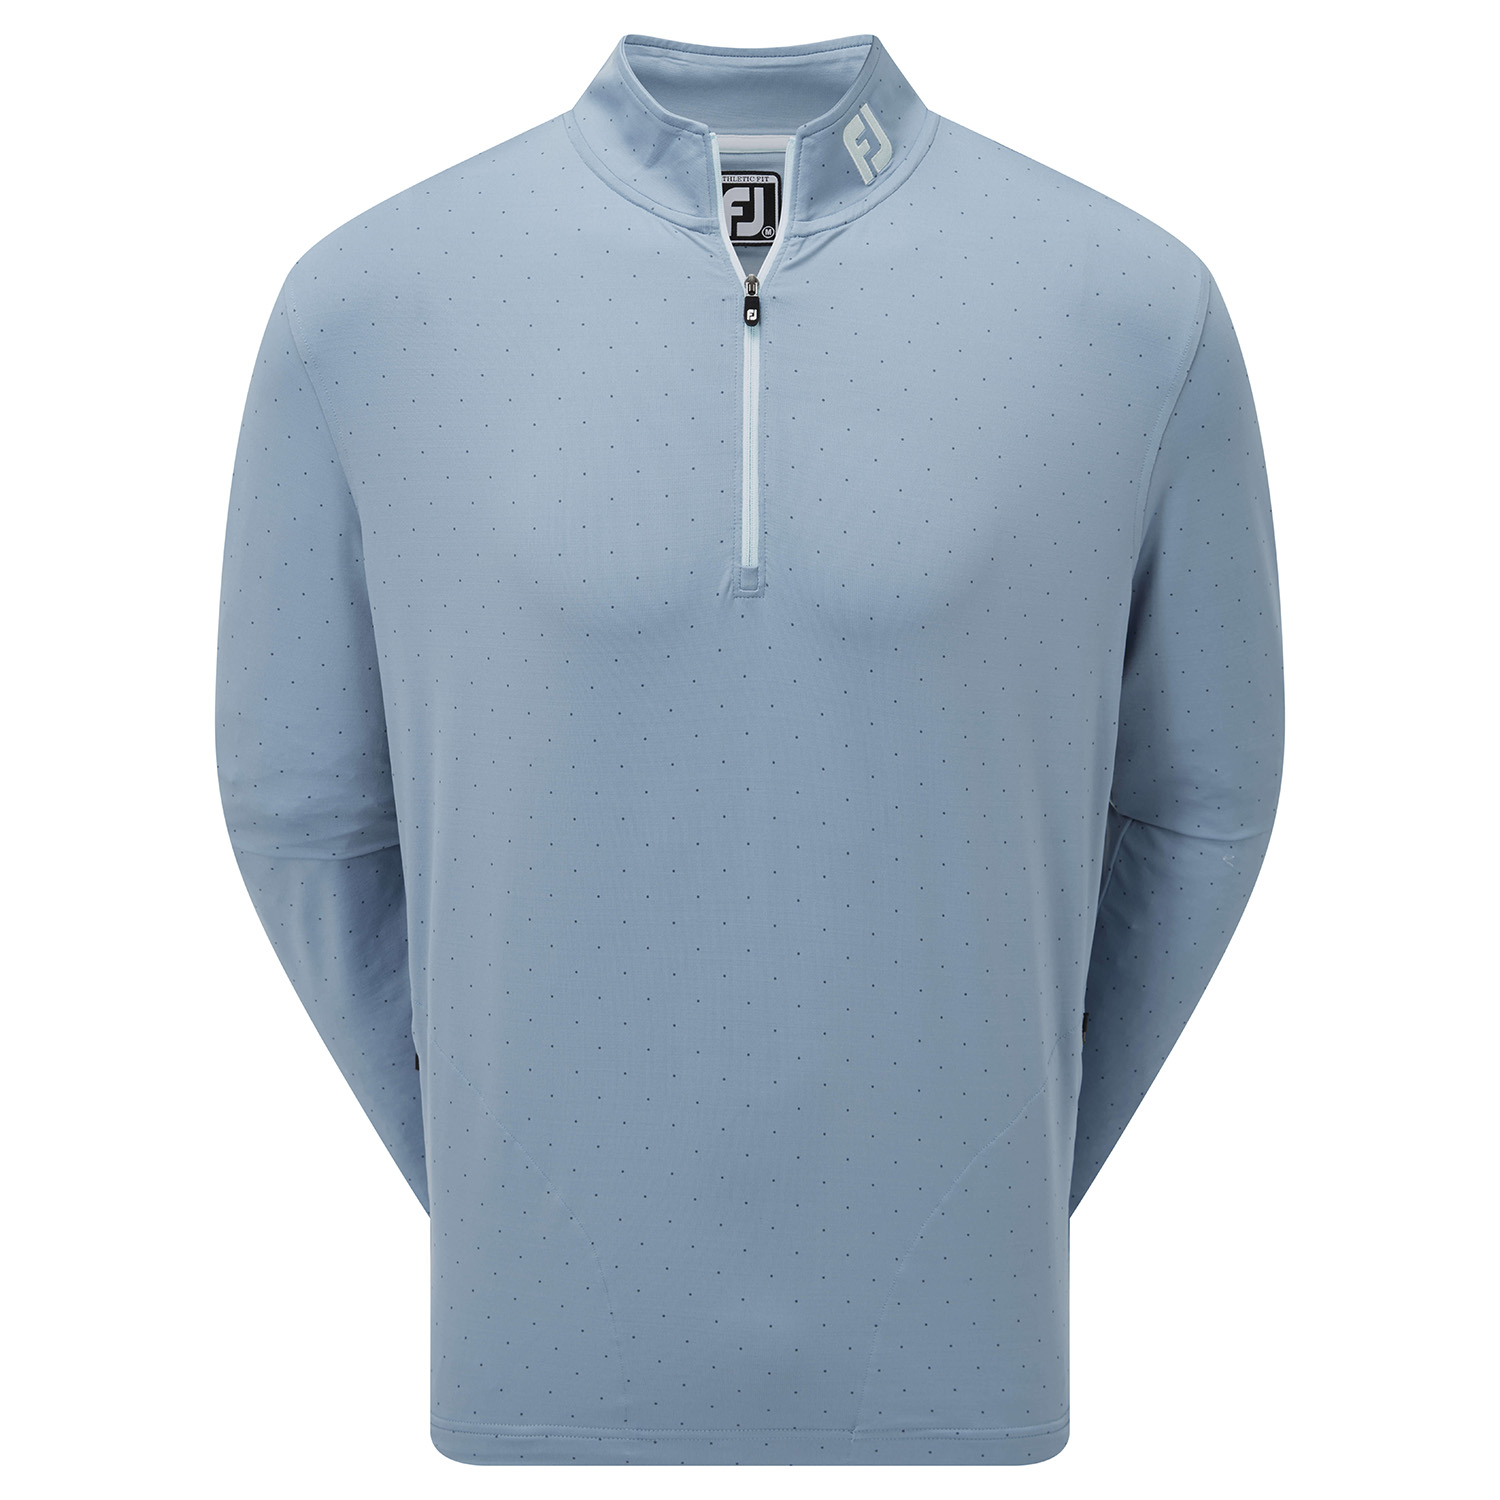 FootJoy Pin Dot Chill Out Zip Neck Golf Sweater